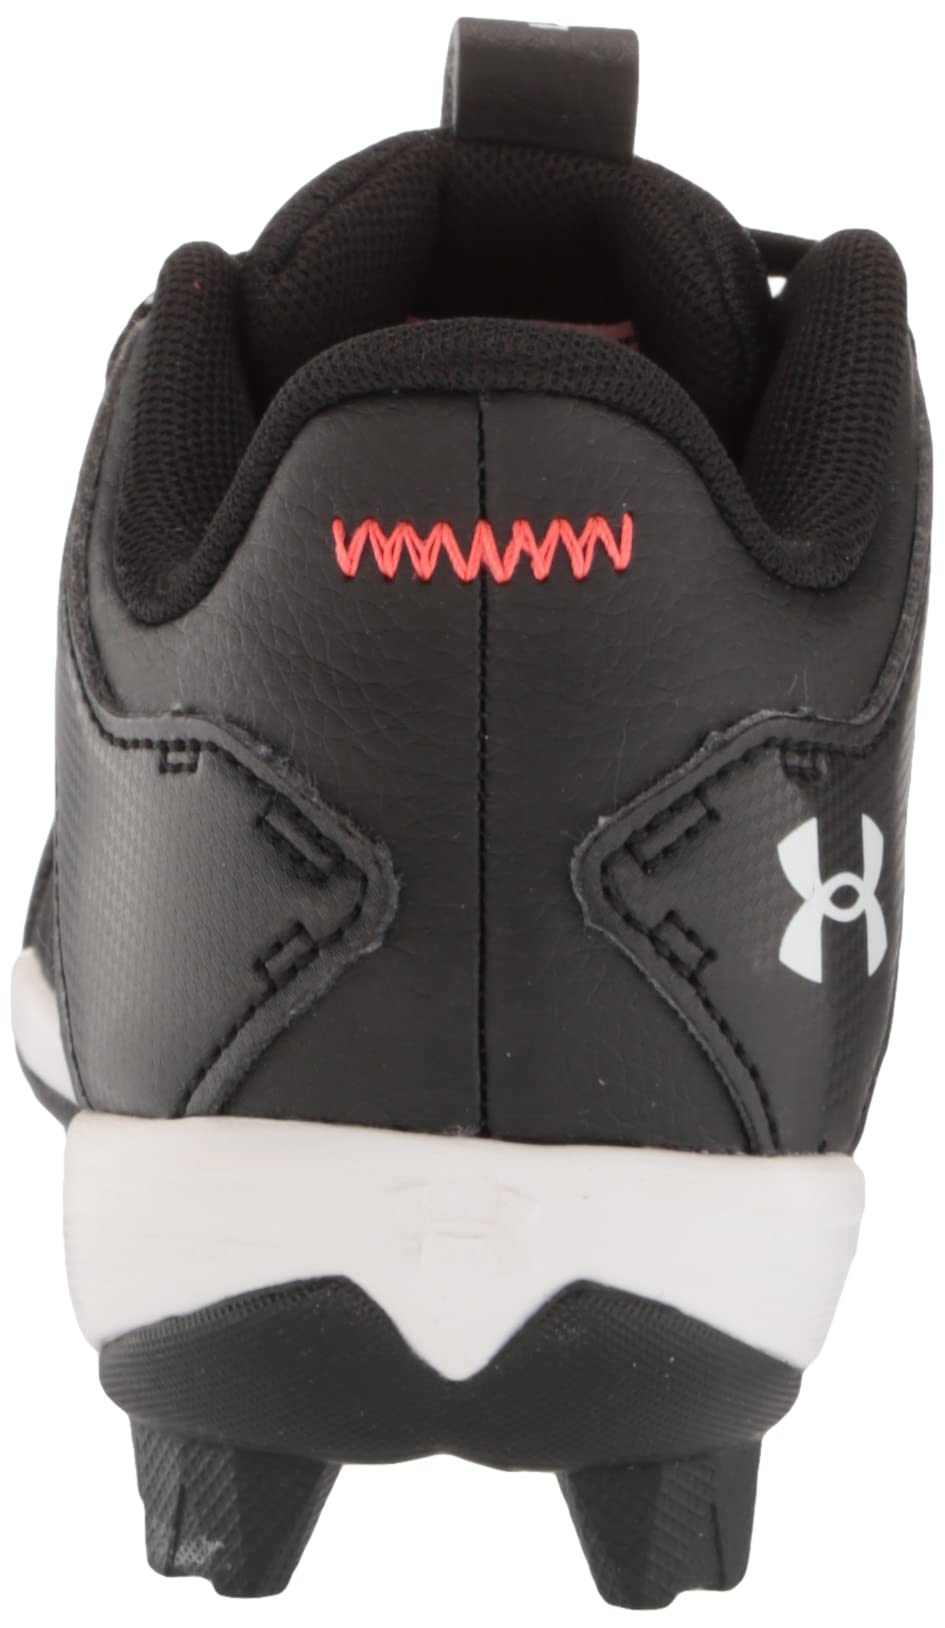 Under Armour baby boys Leadoff Low Junior Rubber Molded Cleat Baseball Shoe, (001) Black/Black/White, 3.5 Big Kid US